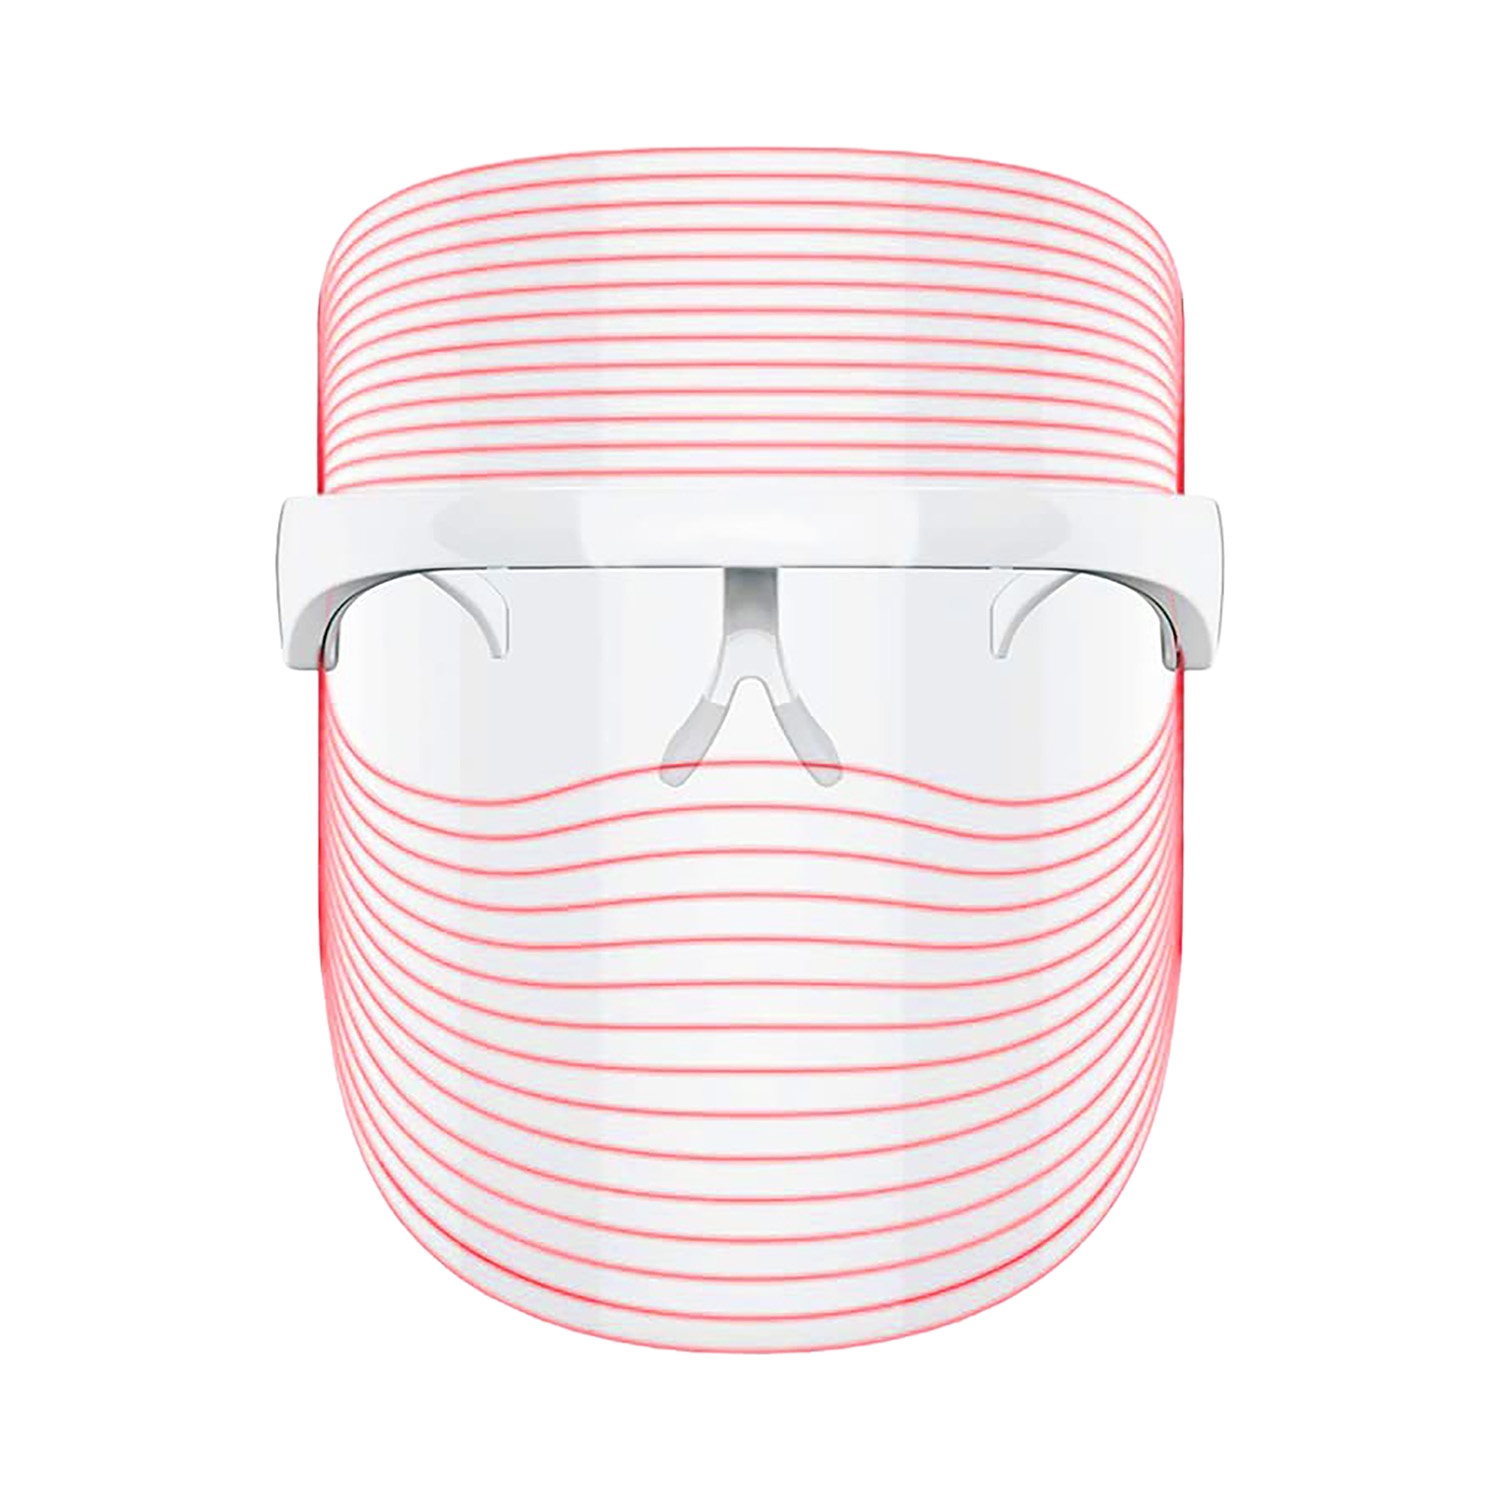 Protouch | Protouch 3 in 1 LED Face Mask - Anti-Ageing & Anti-Acne, Facial Glow Mask For Clean & Clear Skin